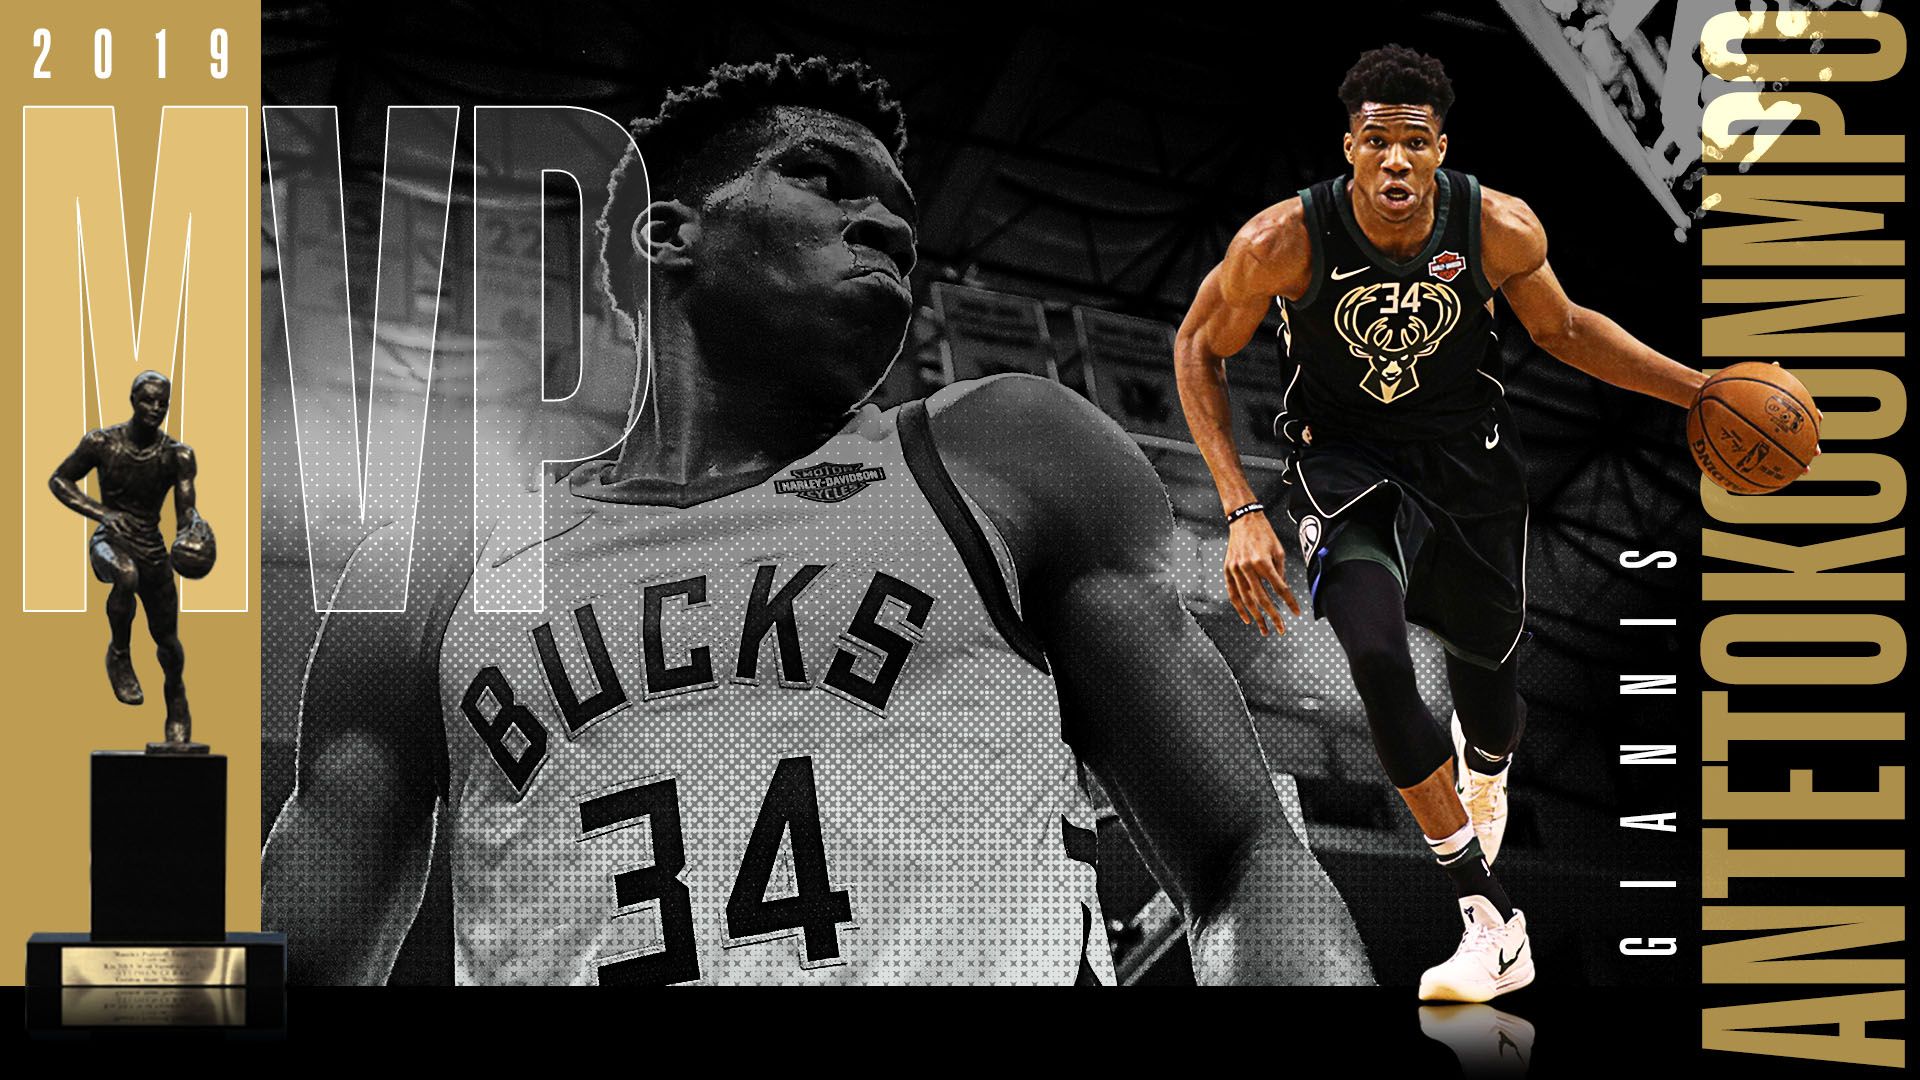 Ferry on Twitter Giannis Antetokounmpo graphic and phone wallpaper for  WallpaperWednesday  FearTheDeer httpstcoDbLGzQ1RKj  Twitter